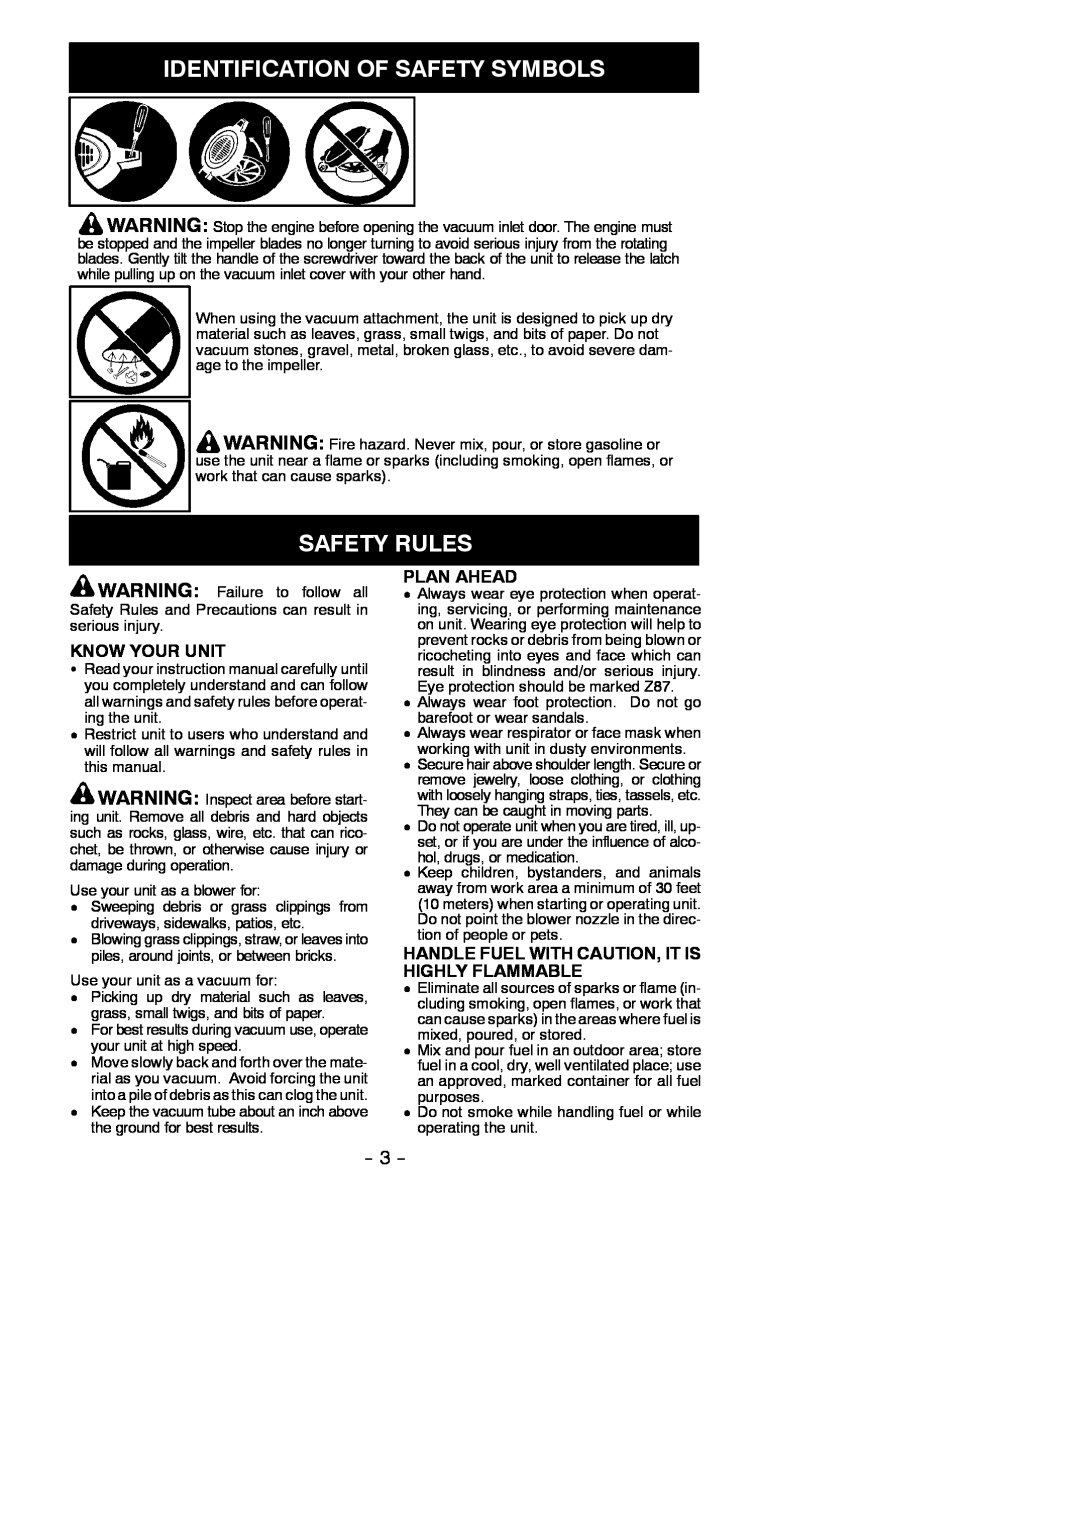 Weed Eater 545137217 instruction manual Safety Rules, Identification Of Safety Symbols, Know Your Unit, Plan Ahead 